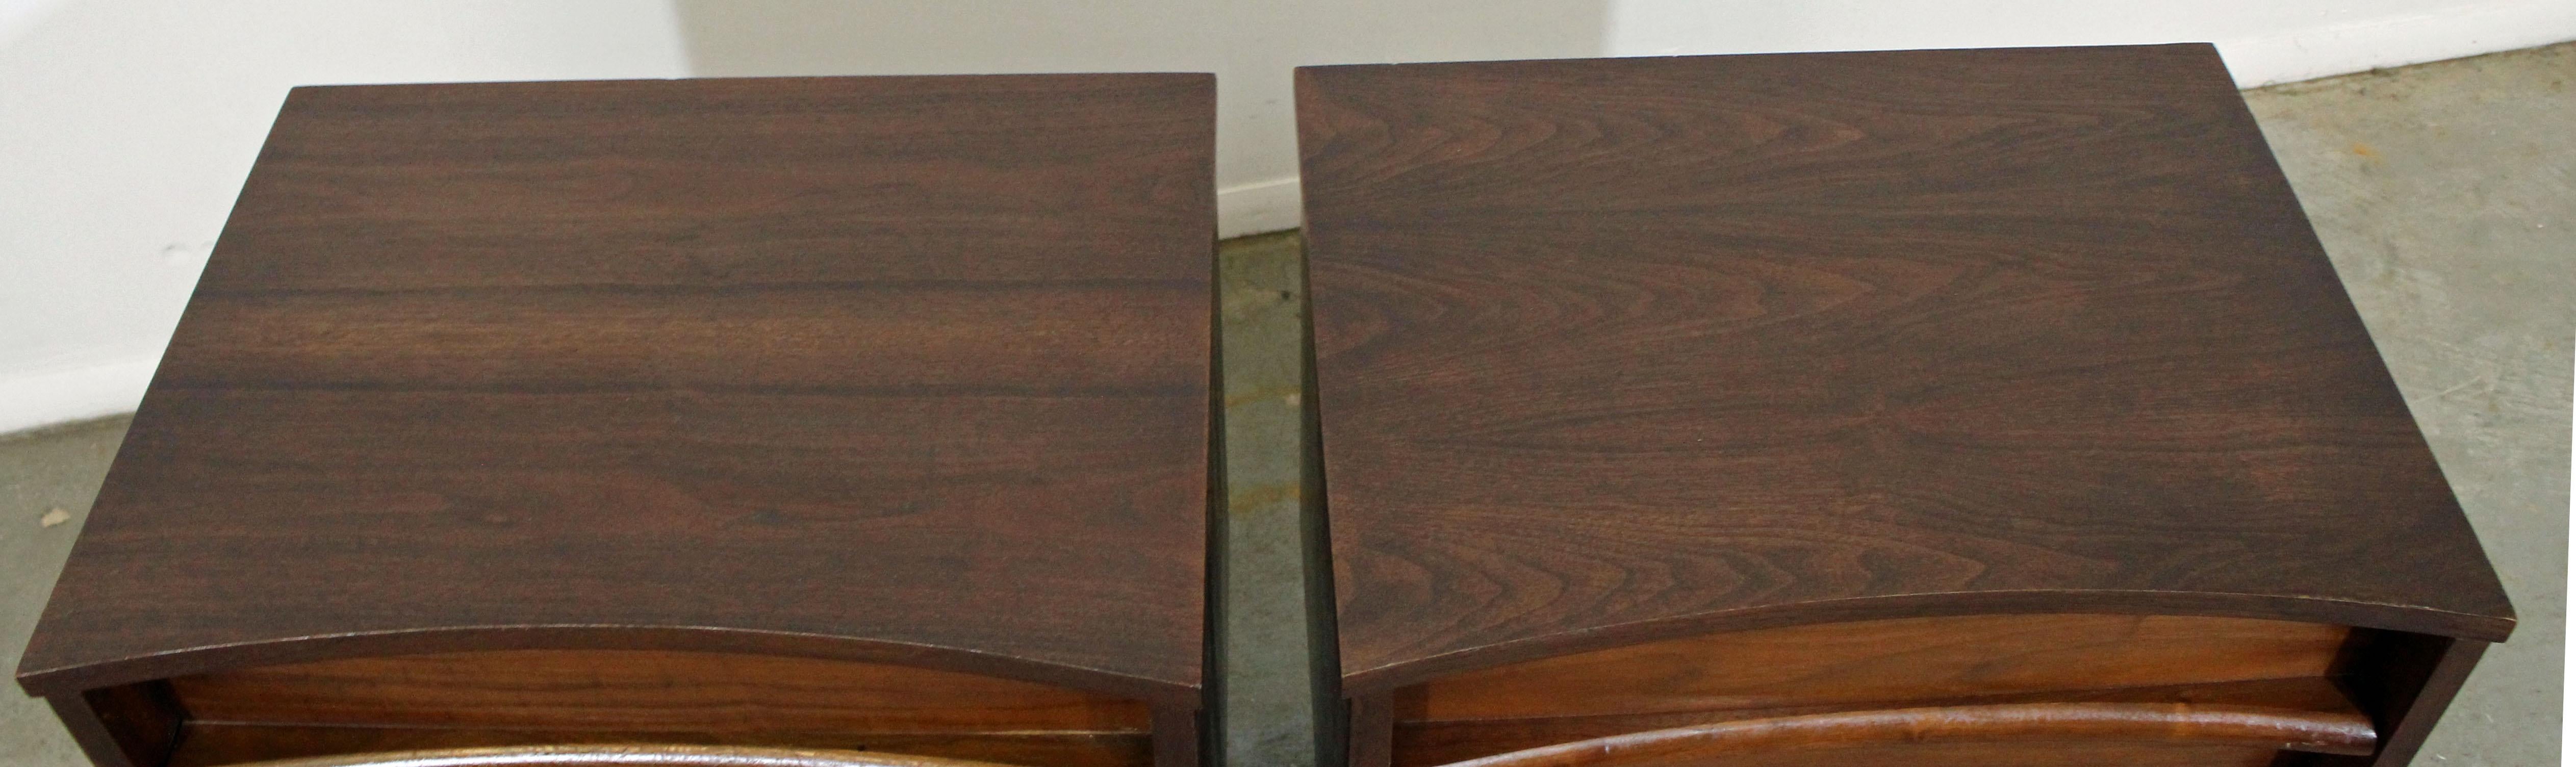 Pair of Mid-Century Modern Sculpted Concave Walnut Nightstands 3